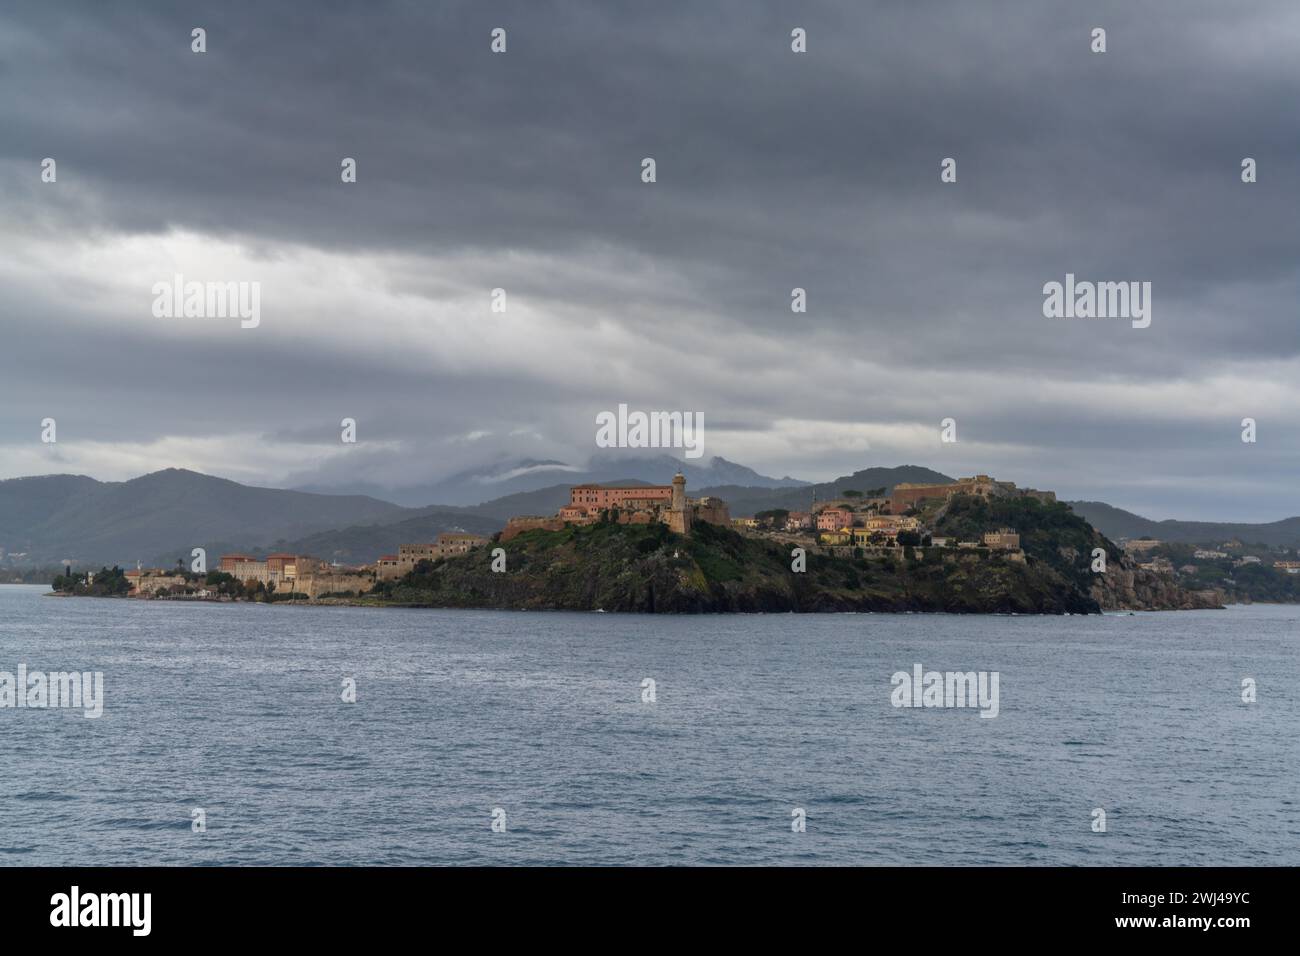 View of Portoferraio with the lighthouse and castle in the foreground Stock Photo